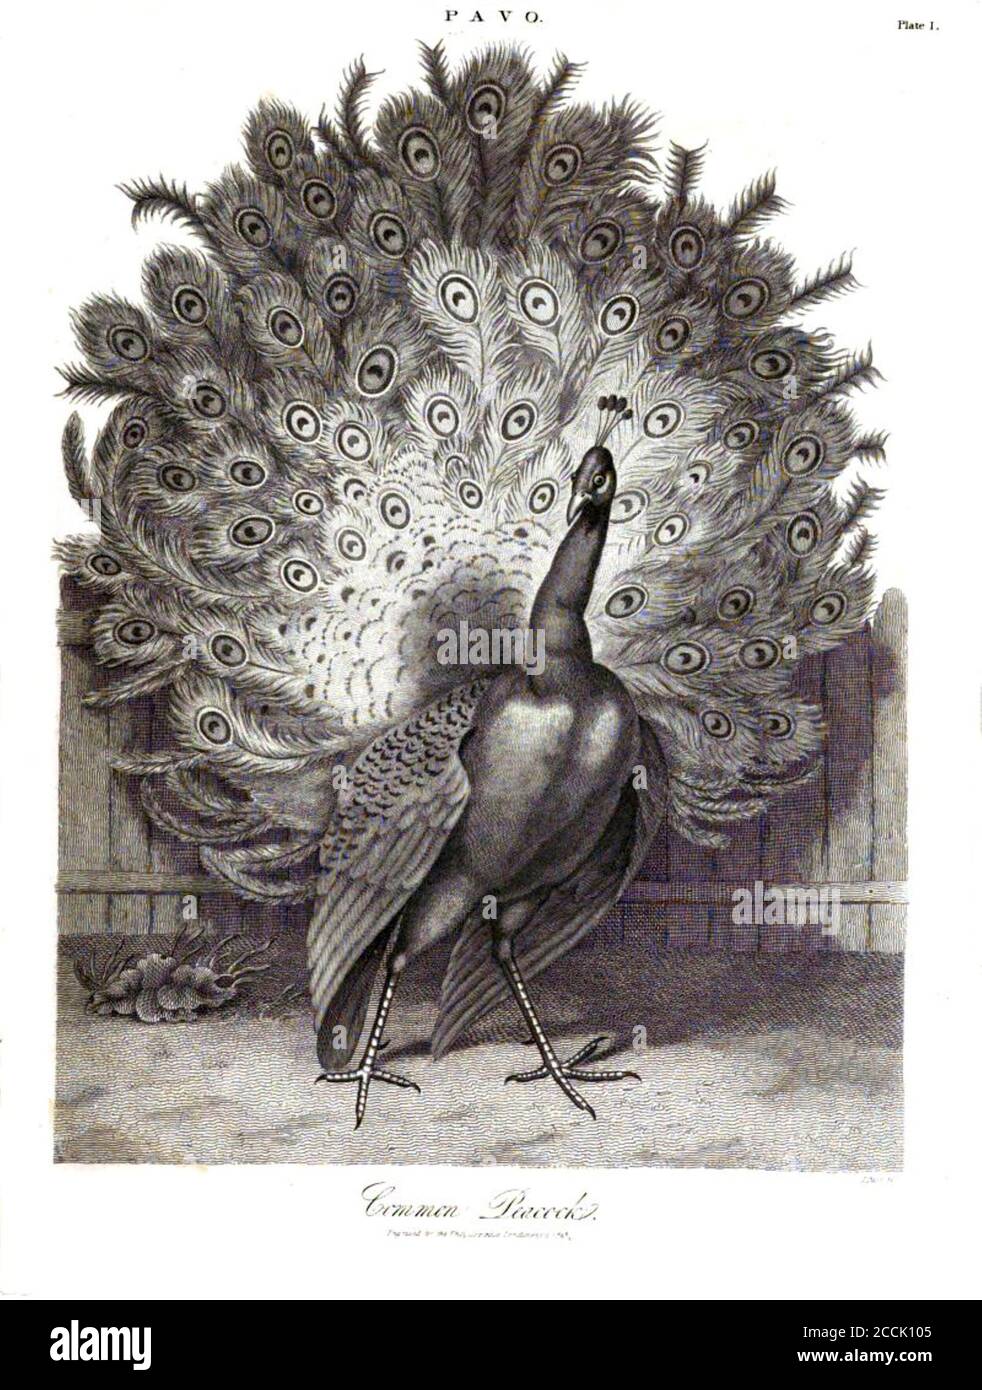 19th century Copperplate engraving of a Common Peacock From the Encyclopaedia Londinensis or, Universal dictionary of arts, sciences, and literature; Volume XIX;  Edited by Wilkes, John. Published in London in 1823 Stock Photo